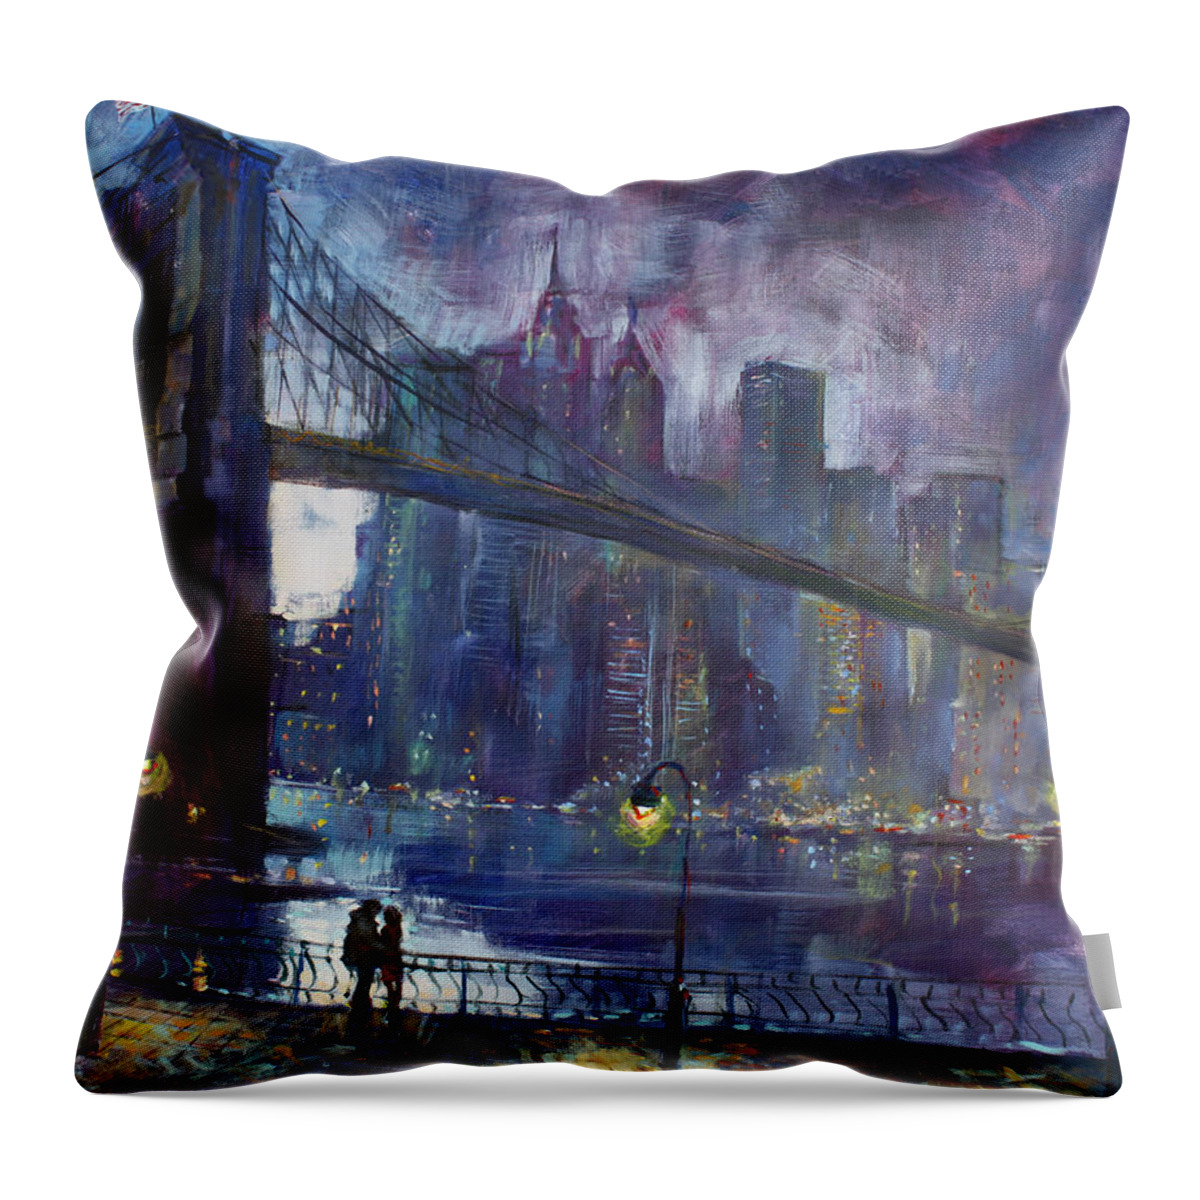 Brooklyn Bridge Throw Pillow featuring the painting Romance by East River NYC by Ylli Haruni